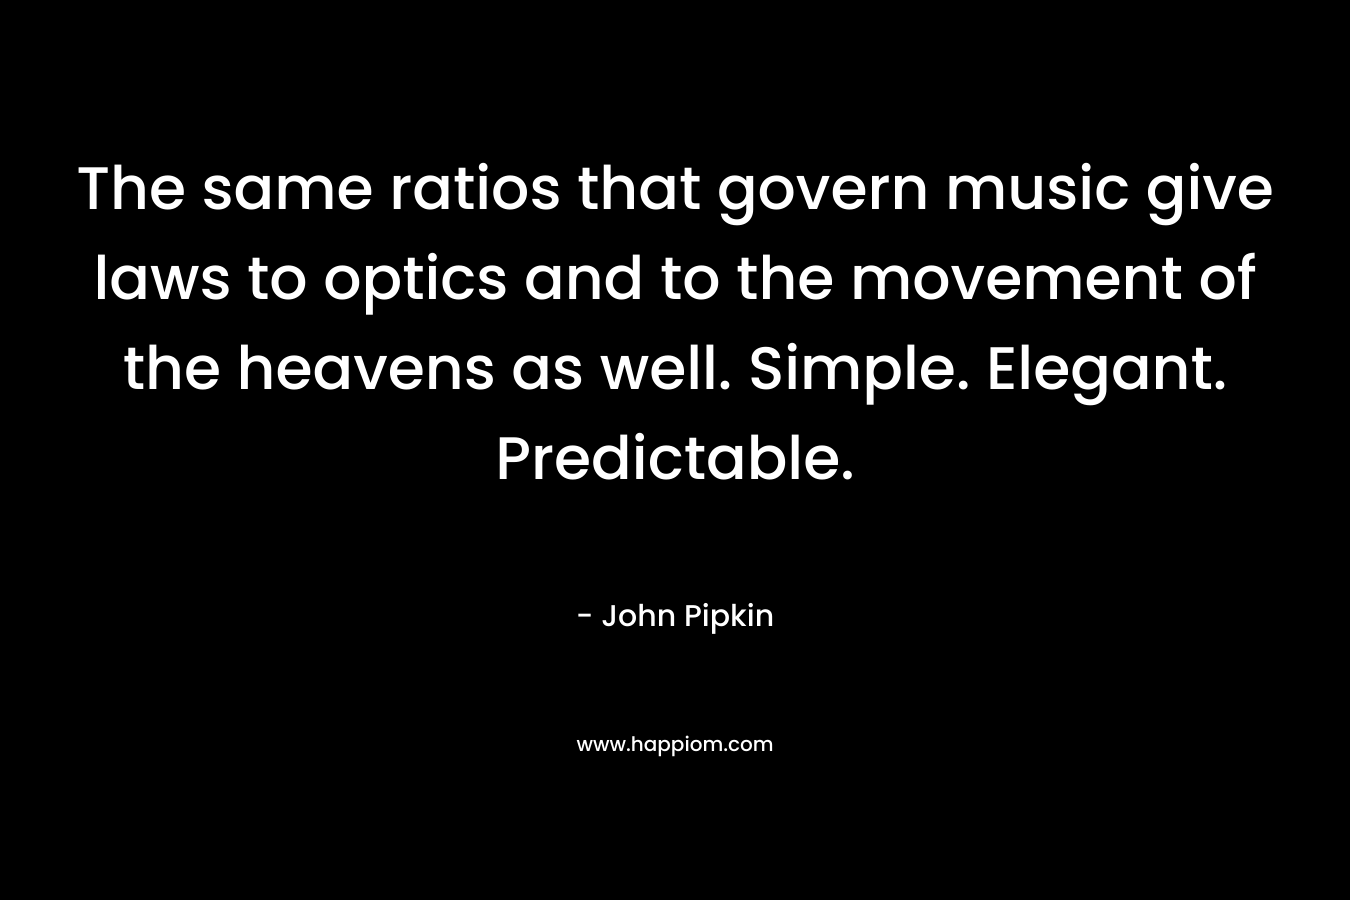 The same ratios that govern music give laws to optics and to the movement of the heavens as well. Simple. Elegant. Predictable. – John Pipkin